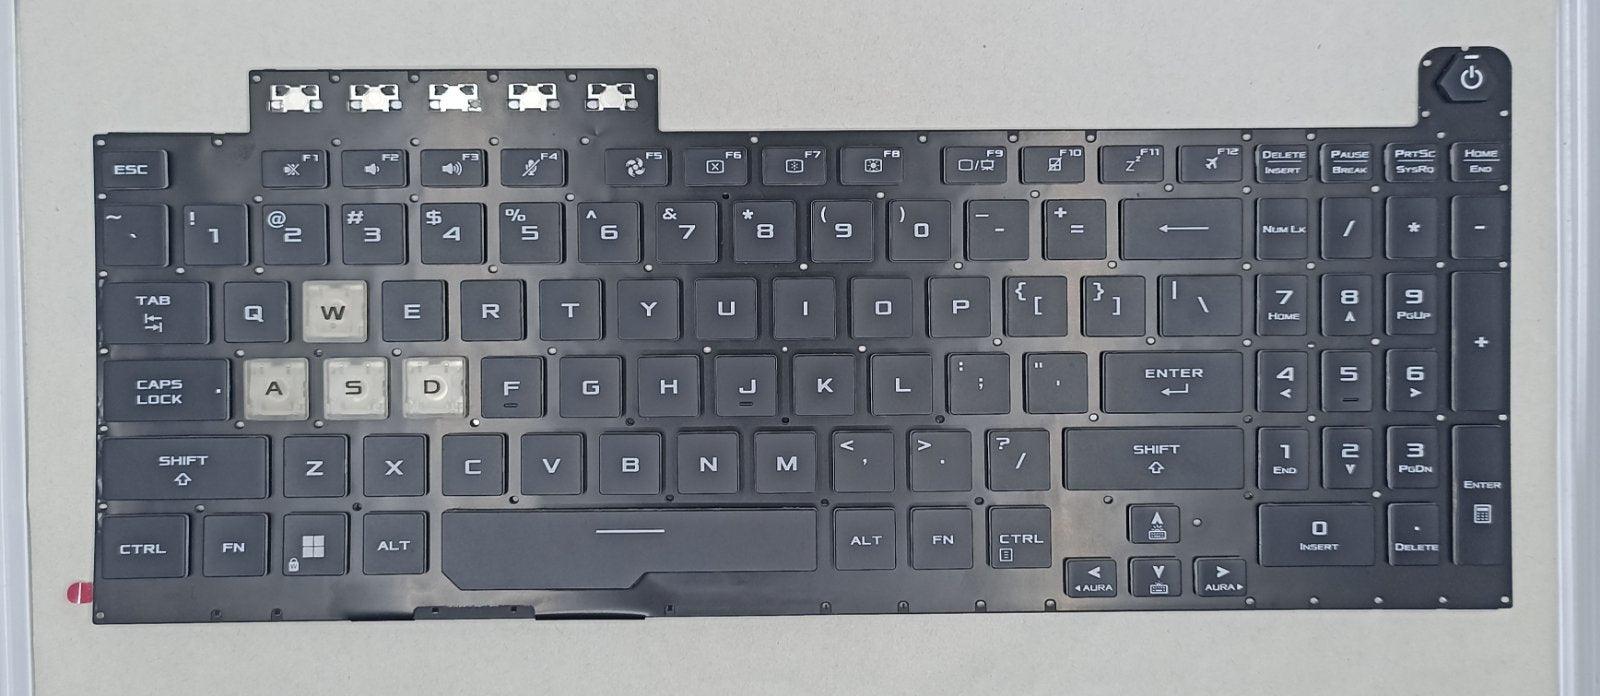 Replacement Keyboard Keys For Asus FA506IV A1